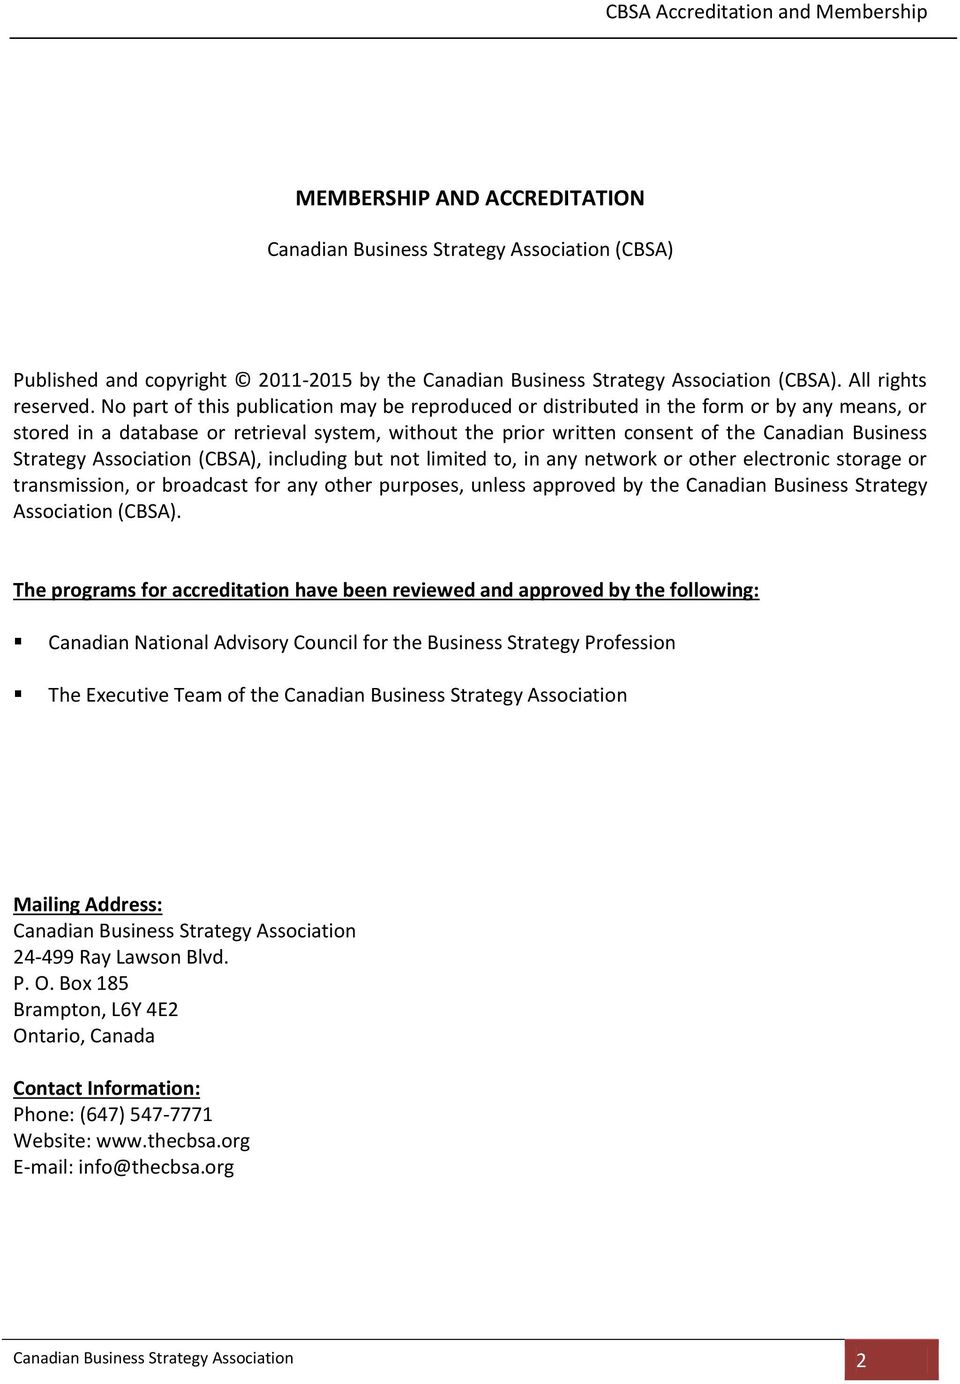 Strategy Association (CBSA), including but not limited to, in any network or other electronic storage or transmission, or broadcast for any other purposes, unless approved by the Canadian Business